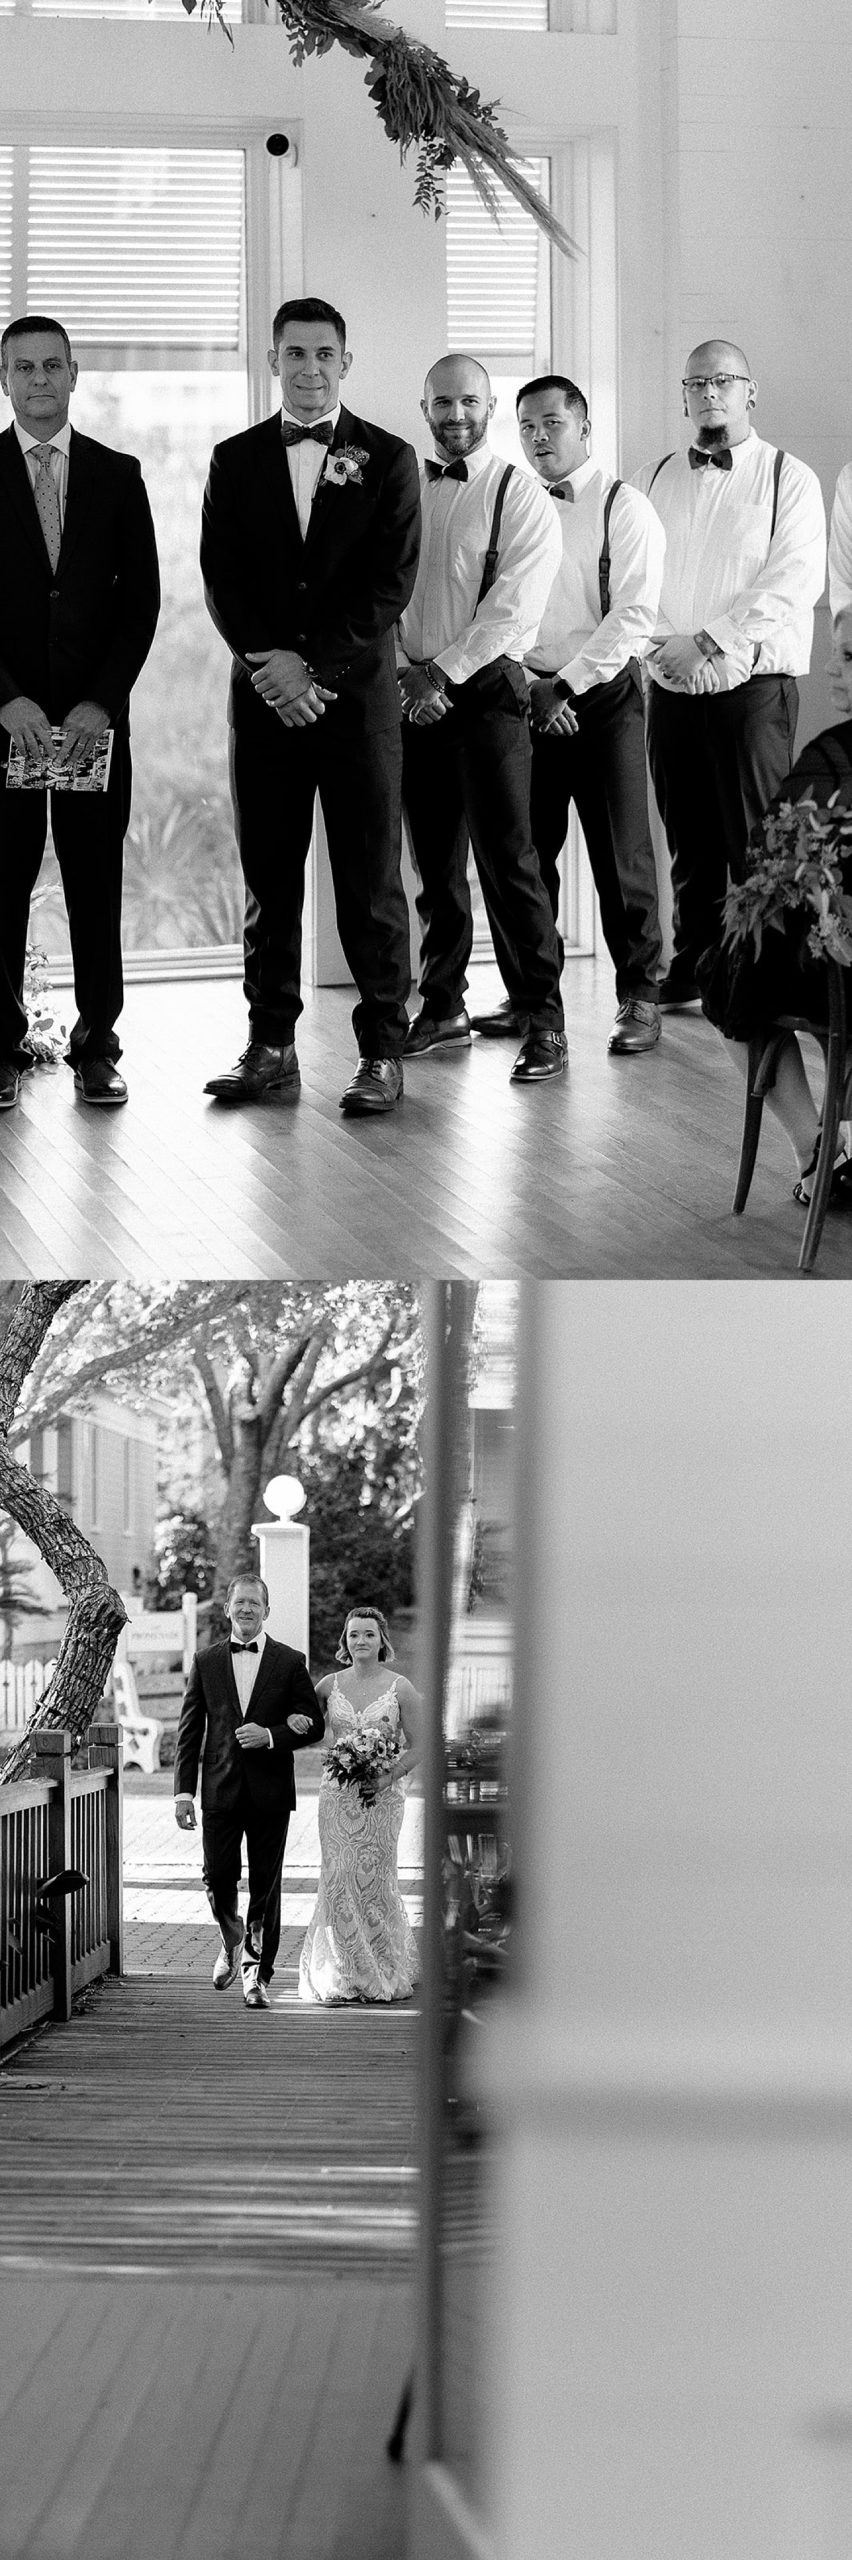 Groom watches bride and father walking down aisle at wedding ceremony